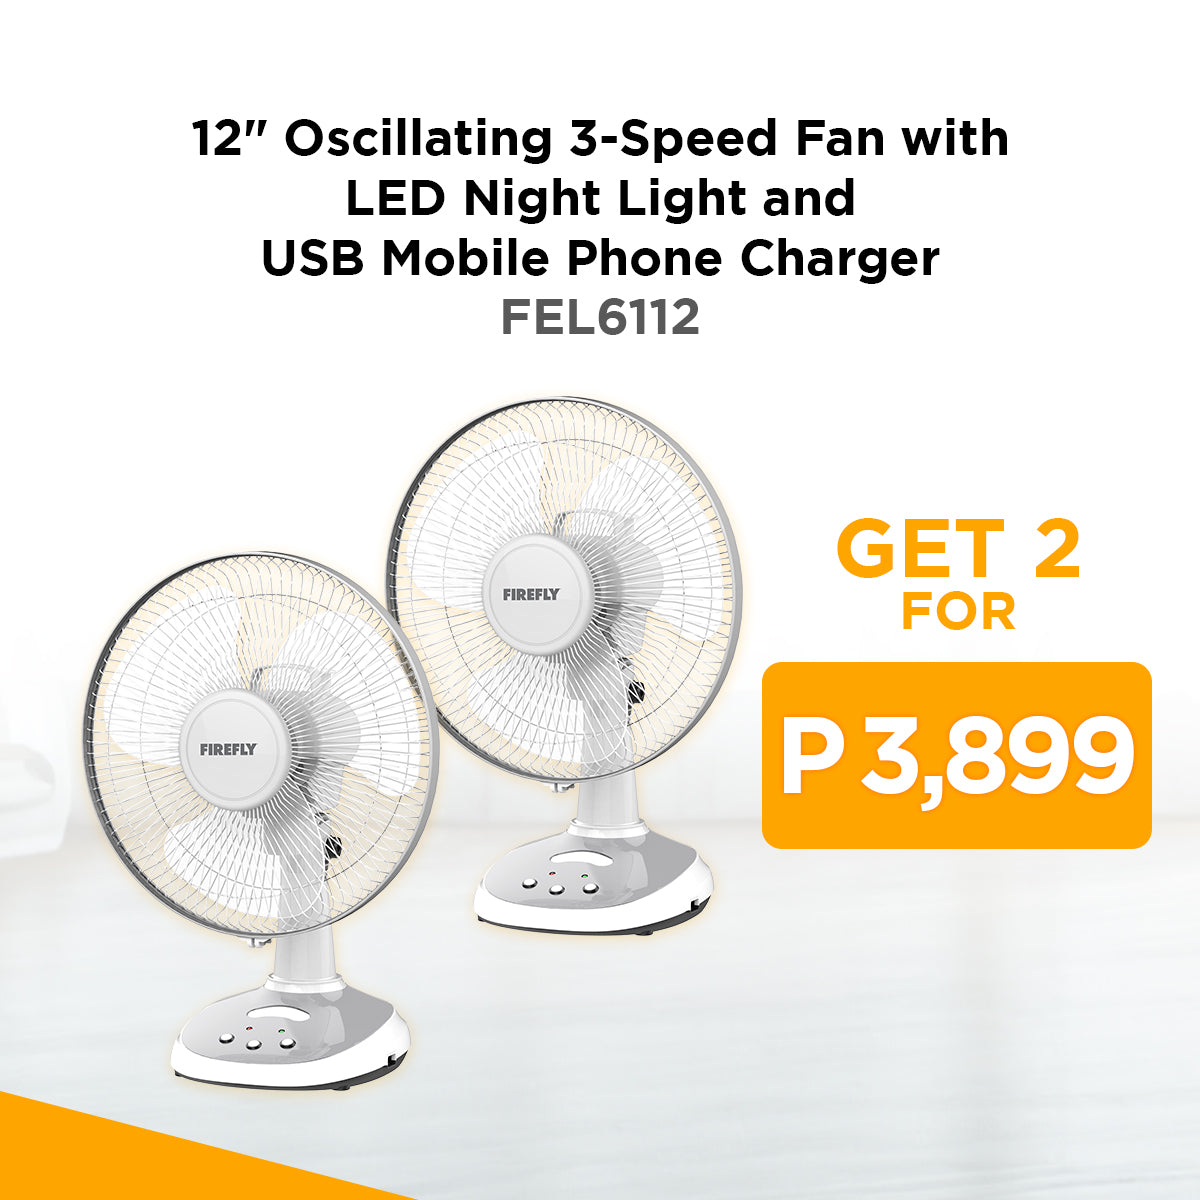 Buy 2 Firefly Rechargeable 12" ACDC Fan with Night Light for only P3,899